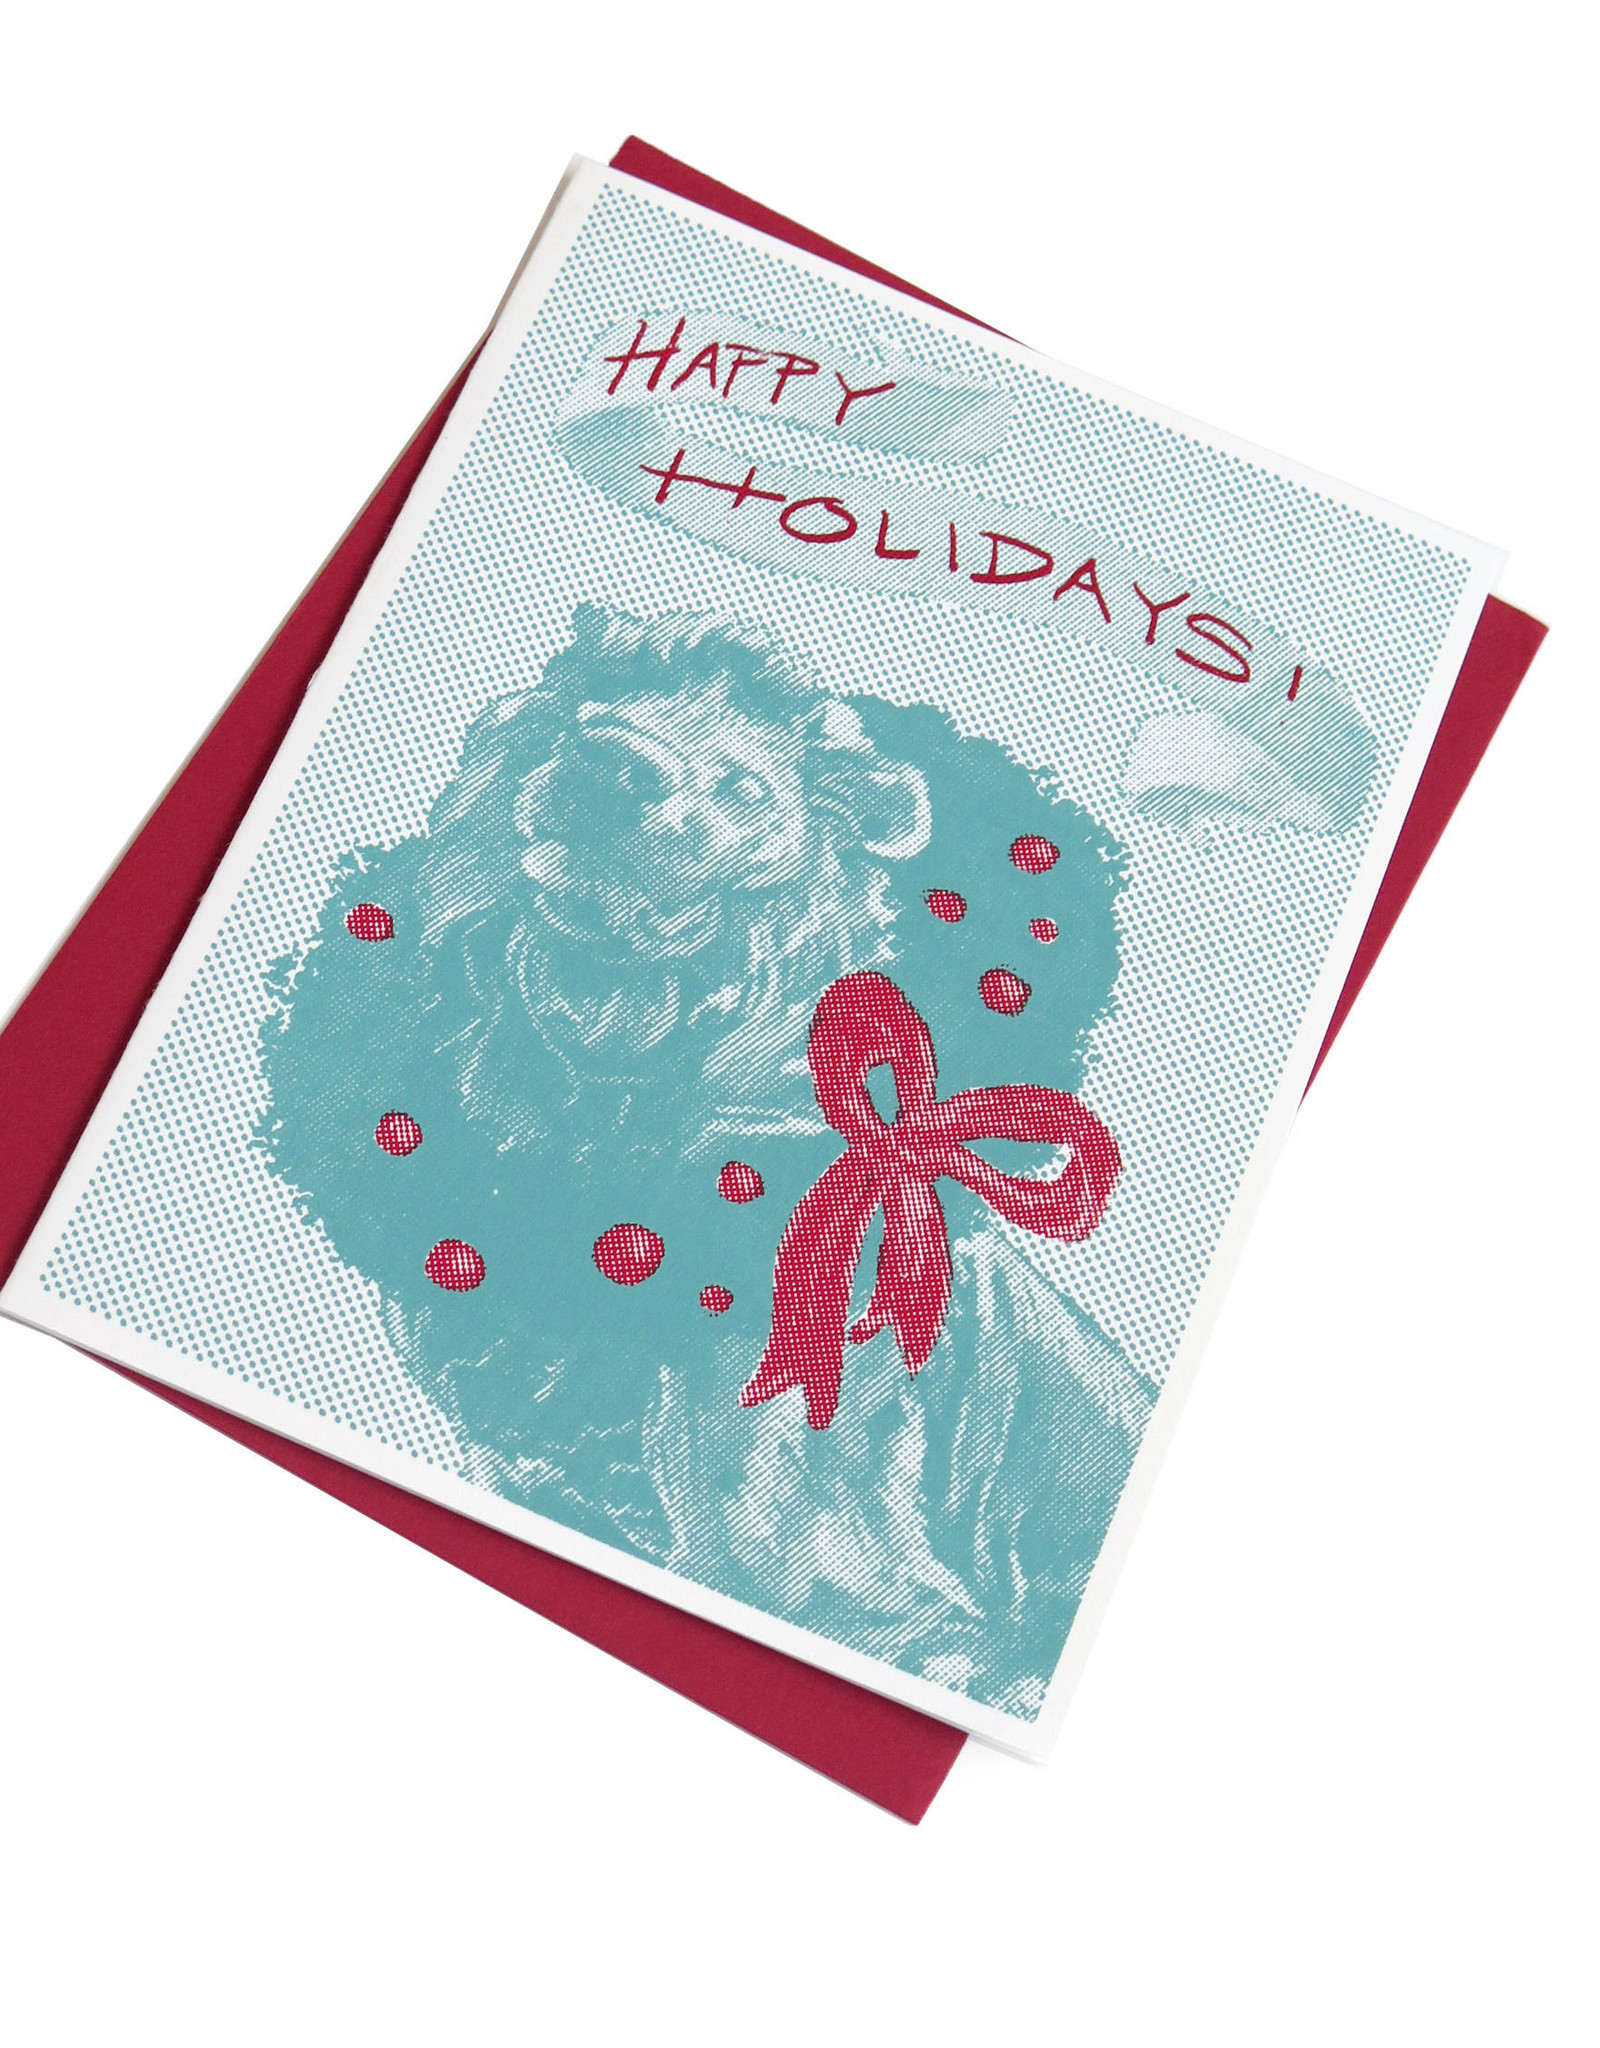 Art Institute Lion Holiday Card, screenprinted, by Lily Cozzens